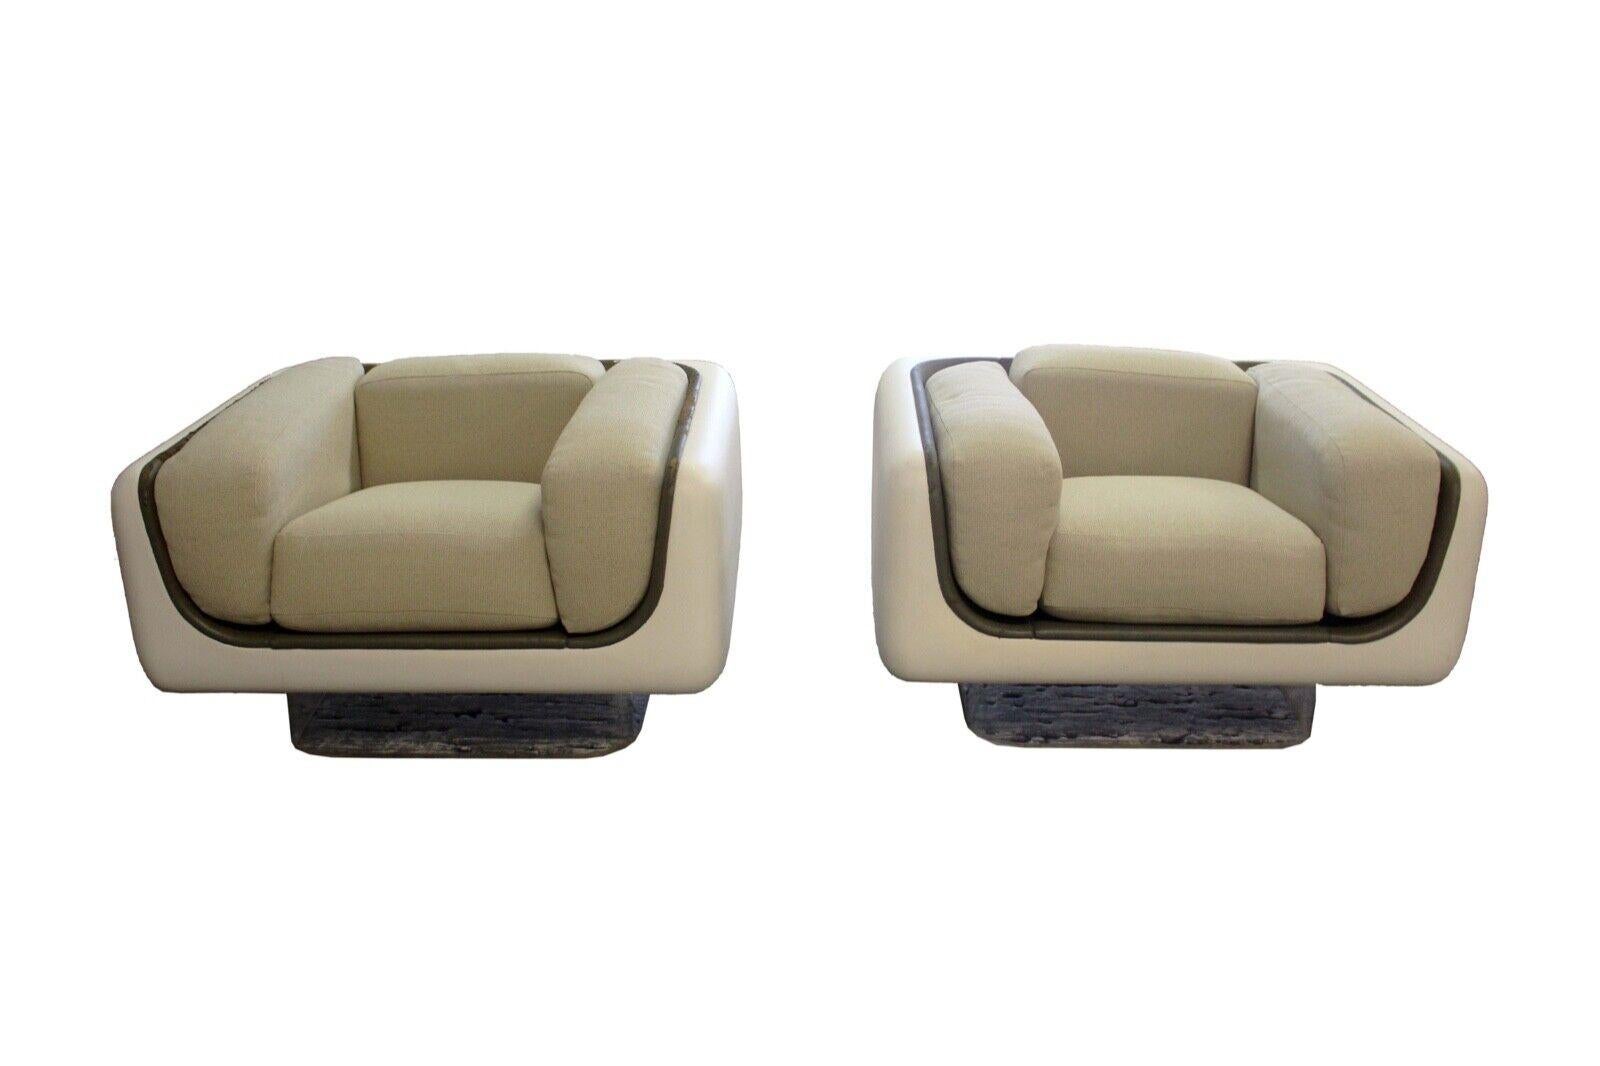 We present this rare pair of by William Andrus for Steelcase, chic and cool, fiberglass floating chairs on lucite base . Matching sofa also available in a separate post. The set is in great condition except for the inside leather trim of the chairs.